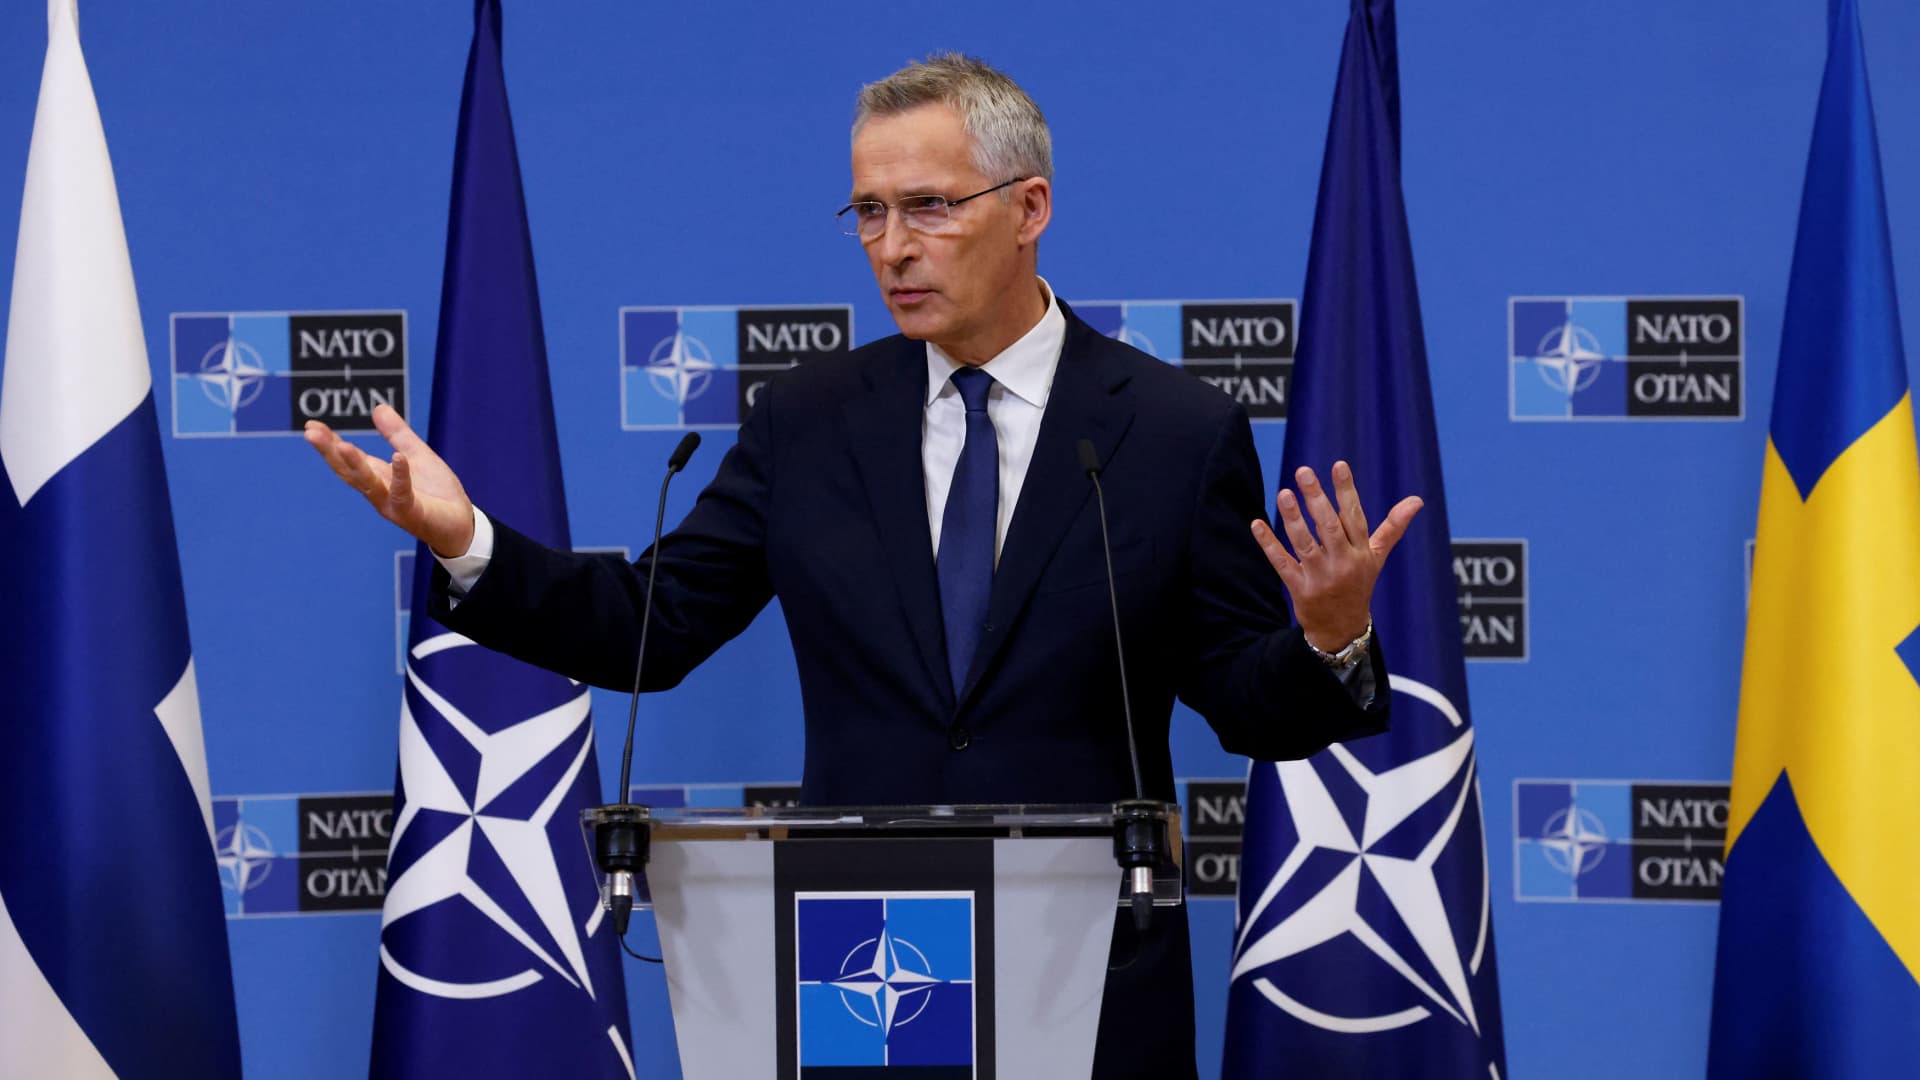 NATO Secretary General Jens Stoltenberg gestures during a news conference with Finland's Foreign Minister Pekka Haavisto and Sweden's Foreign Minister Ann Linde, after Finland and Sweden signed their countries' accession protocols at the alliance's headquarters in Brussels, Belgium July 5, 2022.